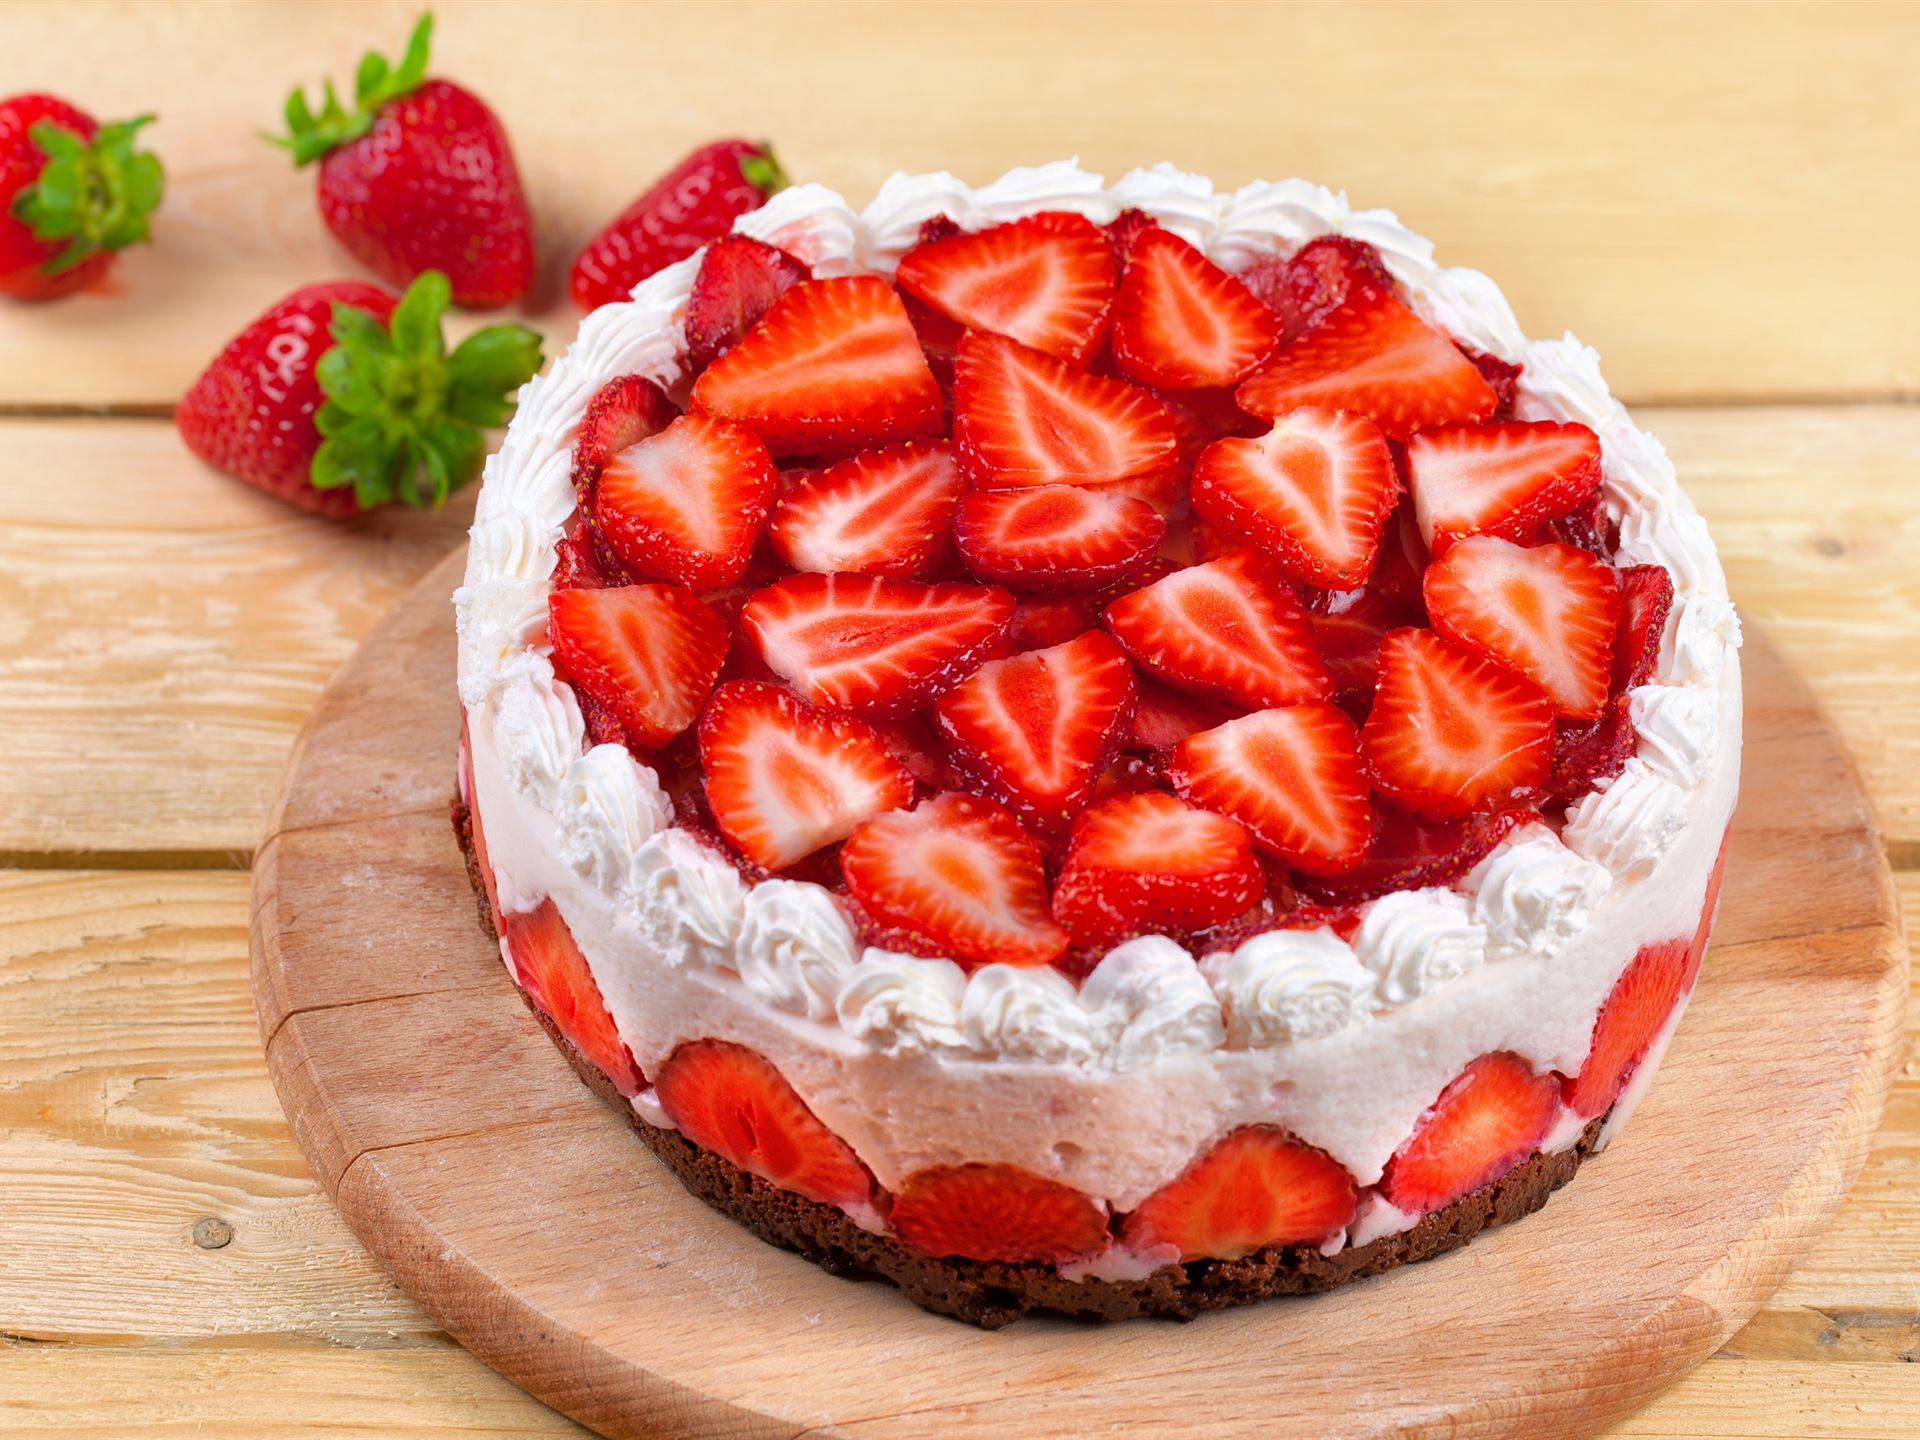 Delicious strawberry cake HD wallpapers #1 - 1920x1440